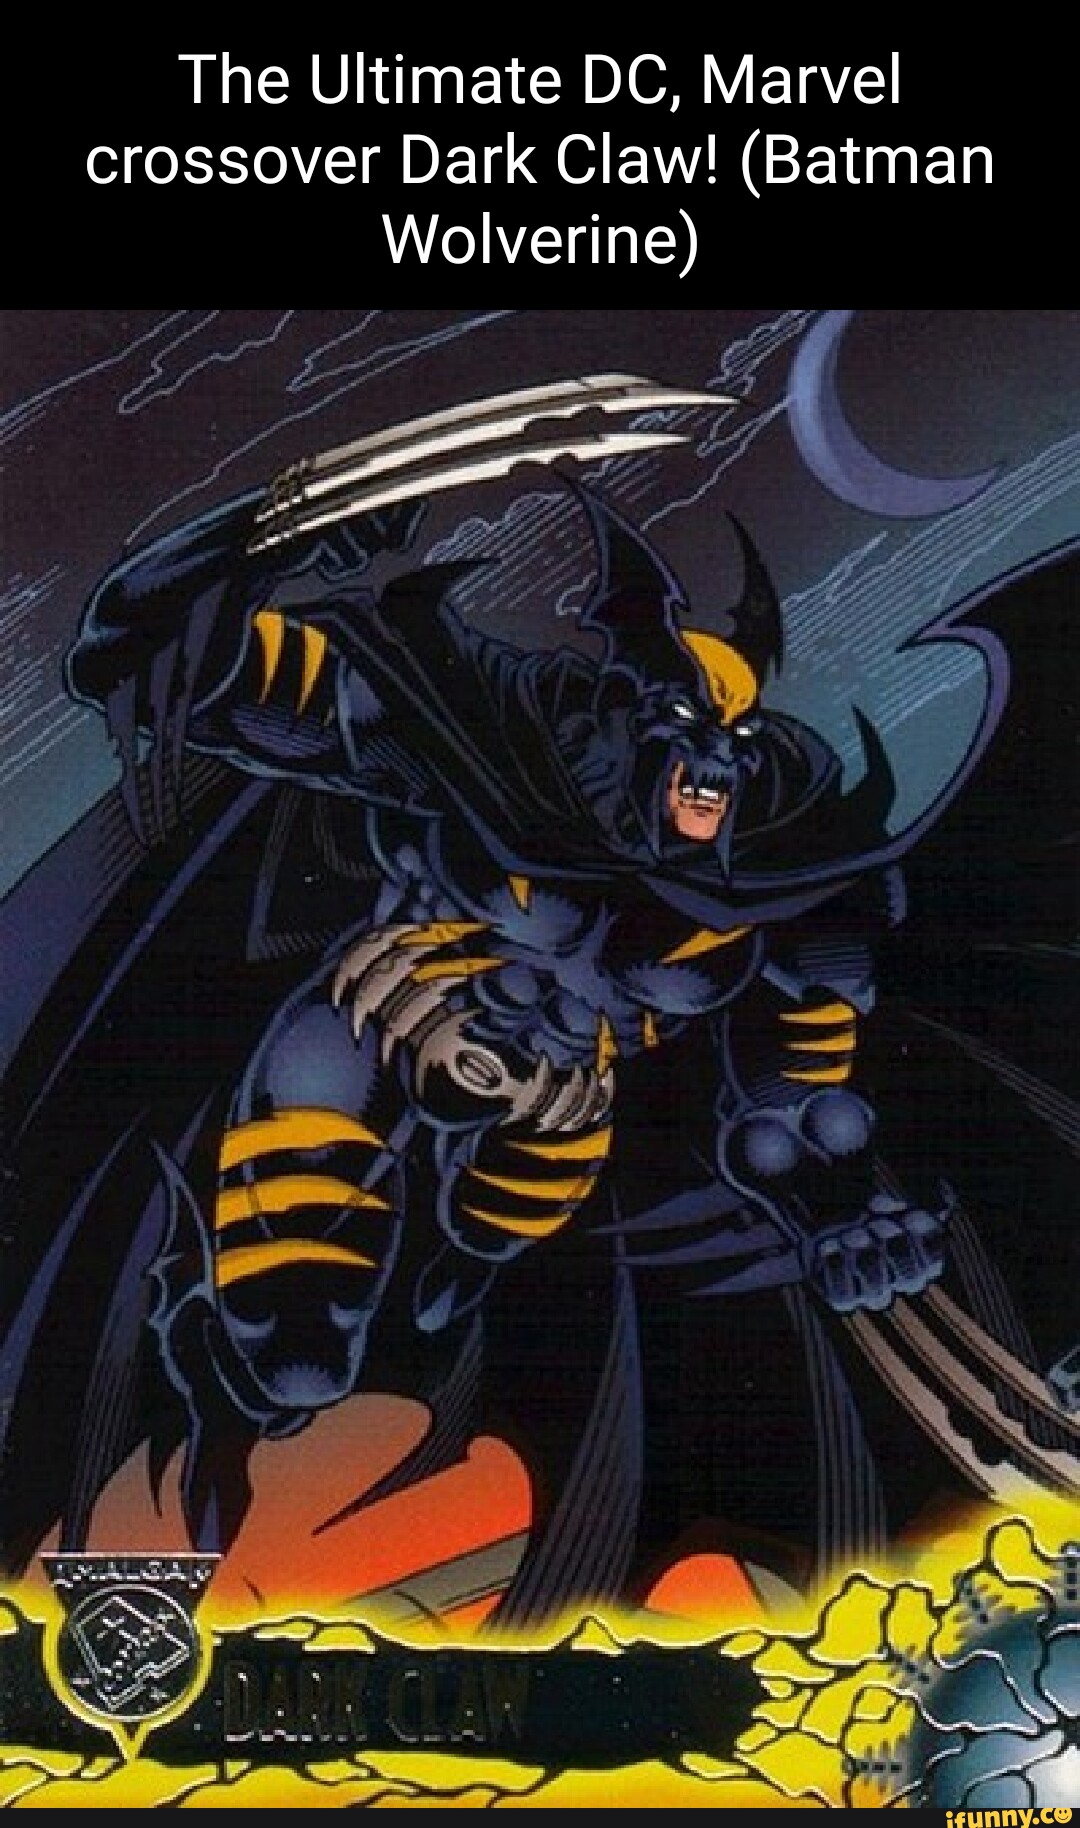 The Ultimate DC, Marvel crossover Dark Claw! (Batman Wolverine) - iFunny